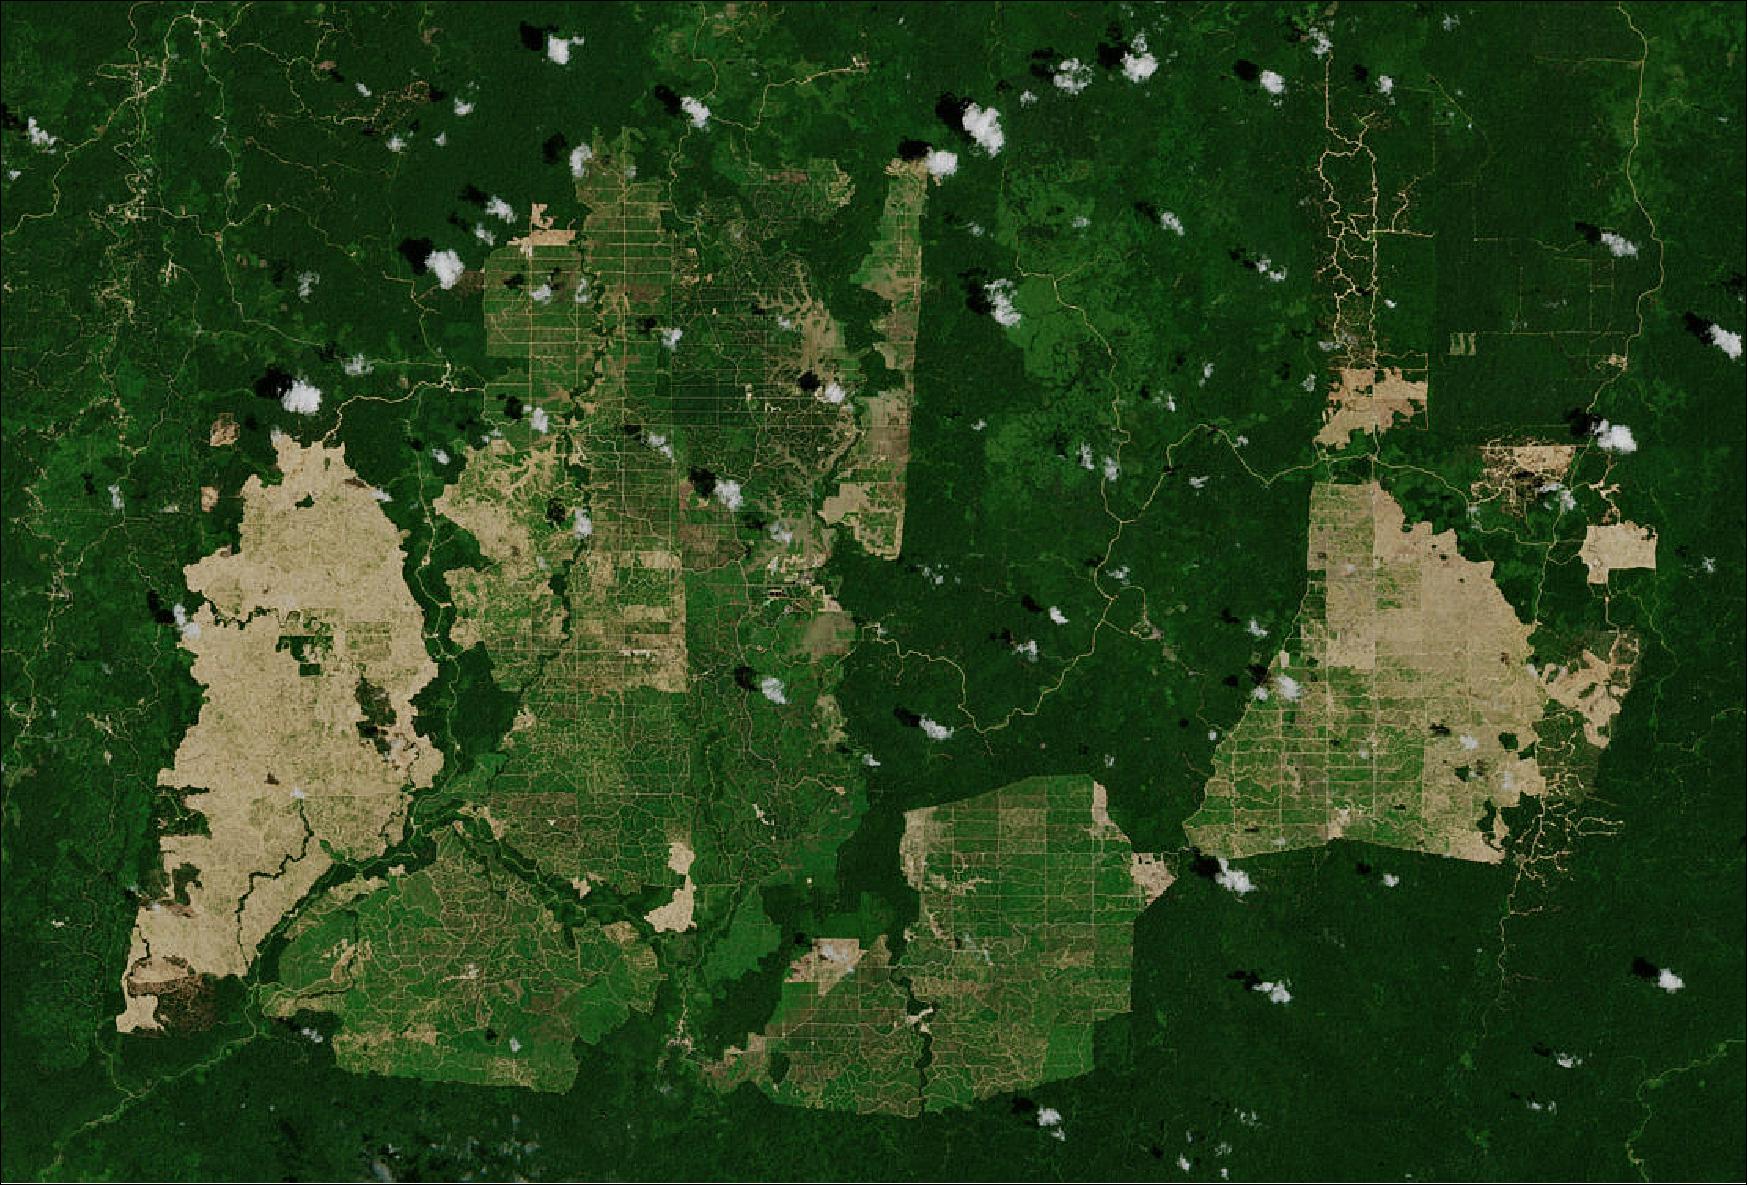 Figure 18: In this image, captured on 15 February 2019, the various stages of the deforestation process are clearly visible – the green patches in the plantations are the well-established palm oil farms, while the light brown patches show the newly-harvested land. The surrounding lush rainforest is visible in dark green. This image is also featured on the Earth from Space video program (image credit: ESA, the image contains modified Copernicus Sentinel data (2019), processed by ESA, CC BY-SA 3.0 IGO)